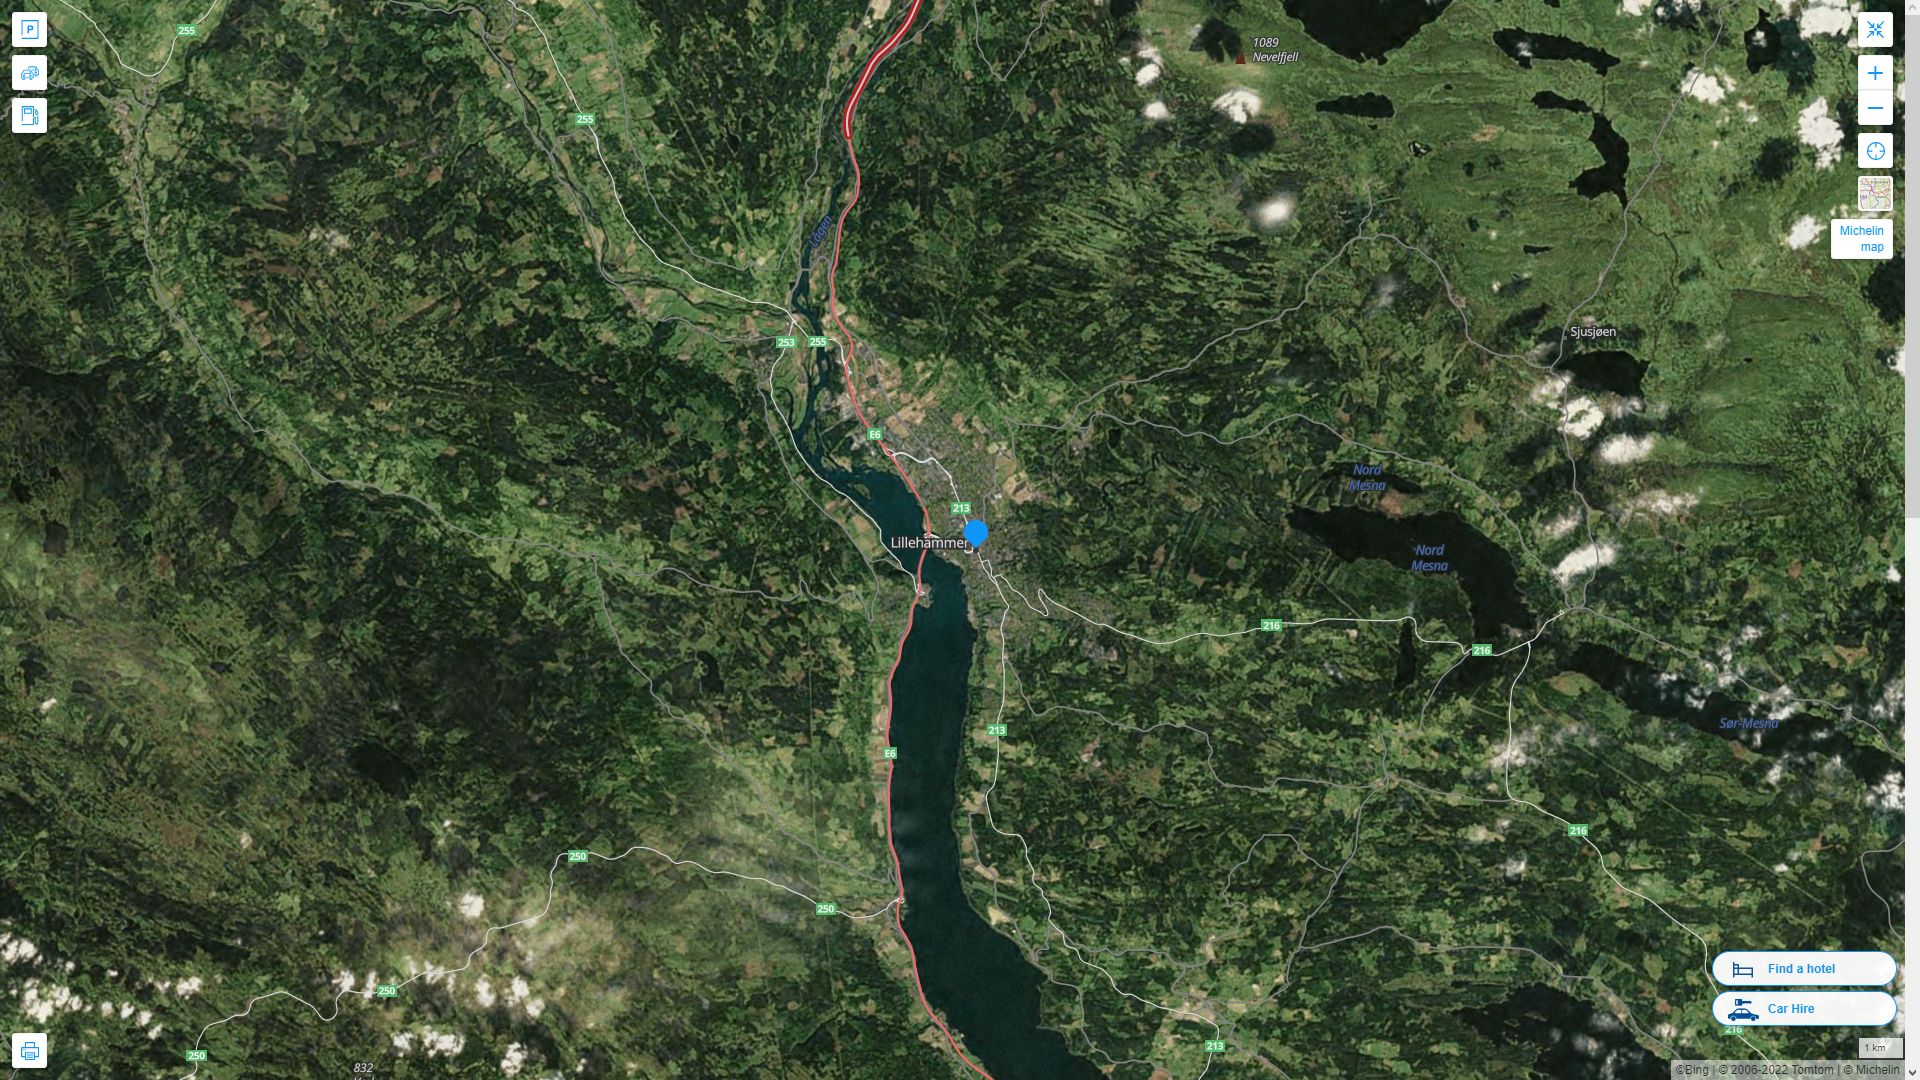 Lillehammer Highway and Road Map with Satellite View